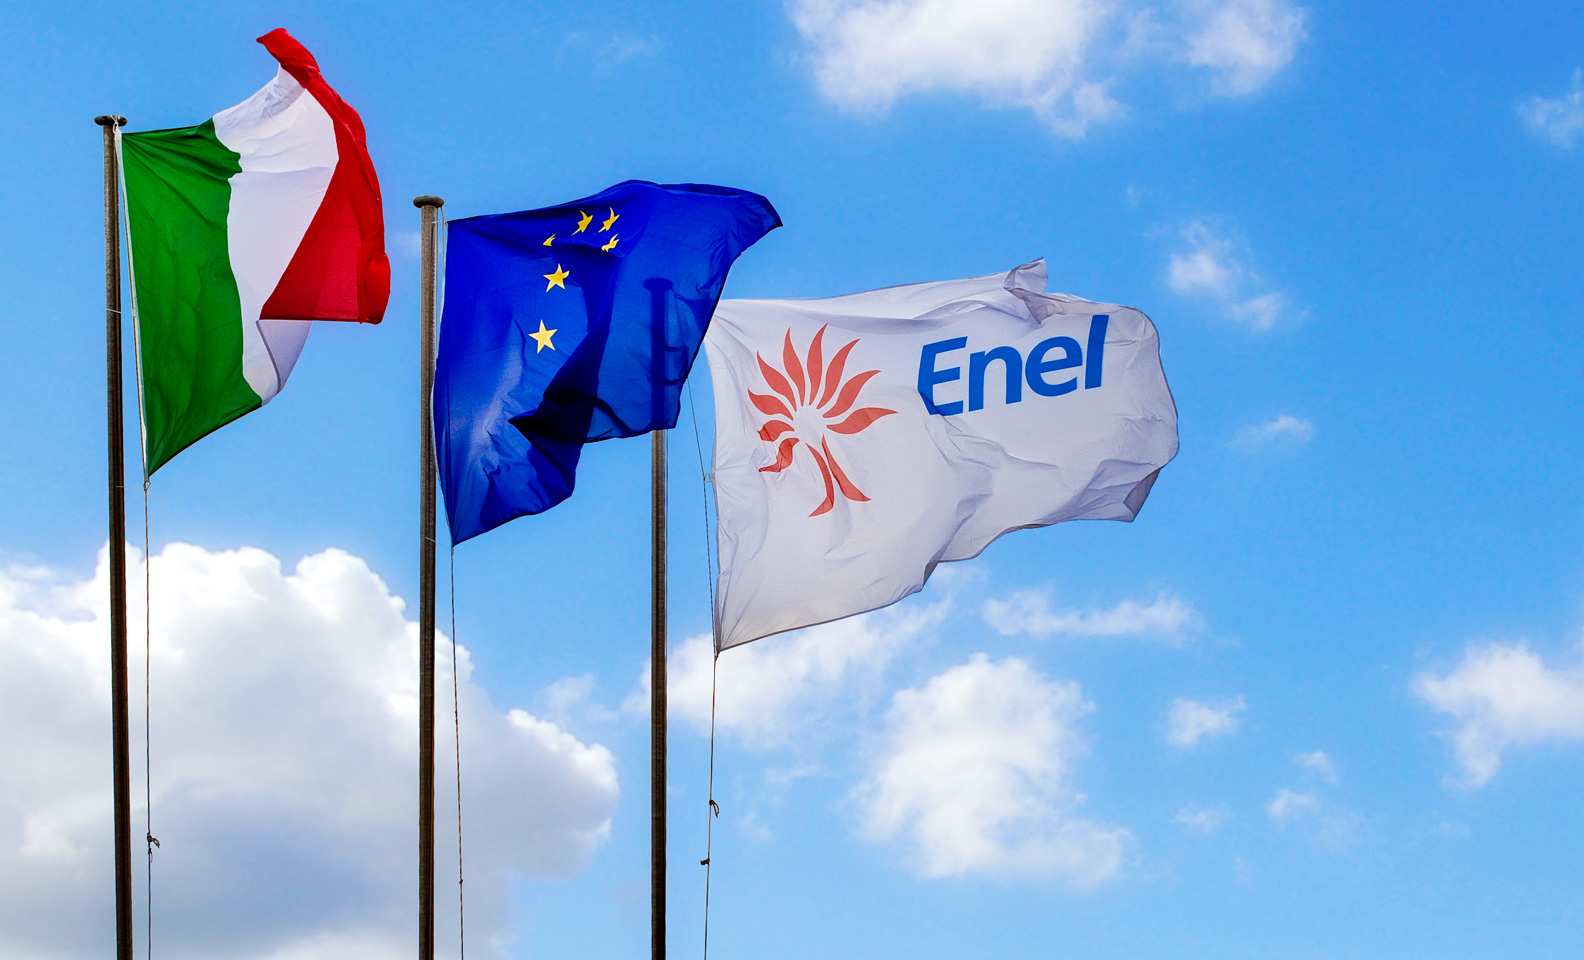 Enel Group